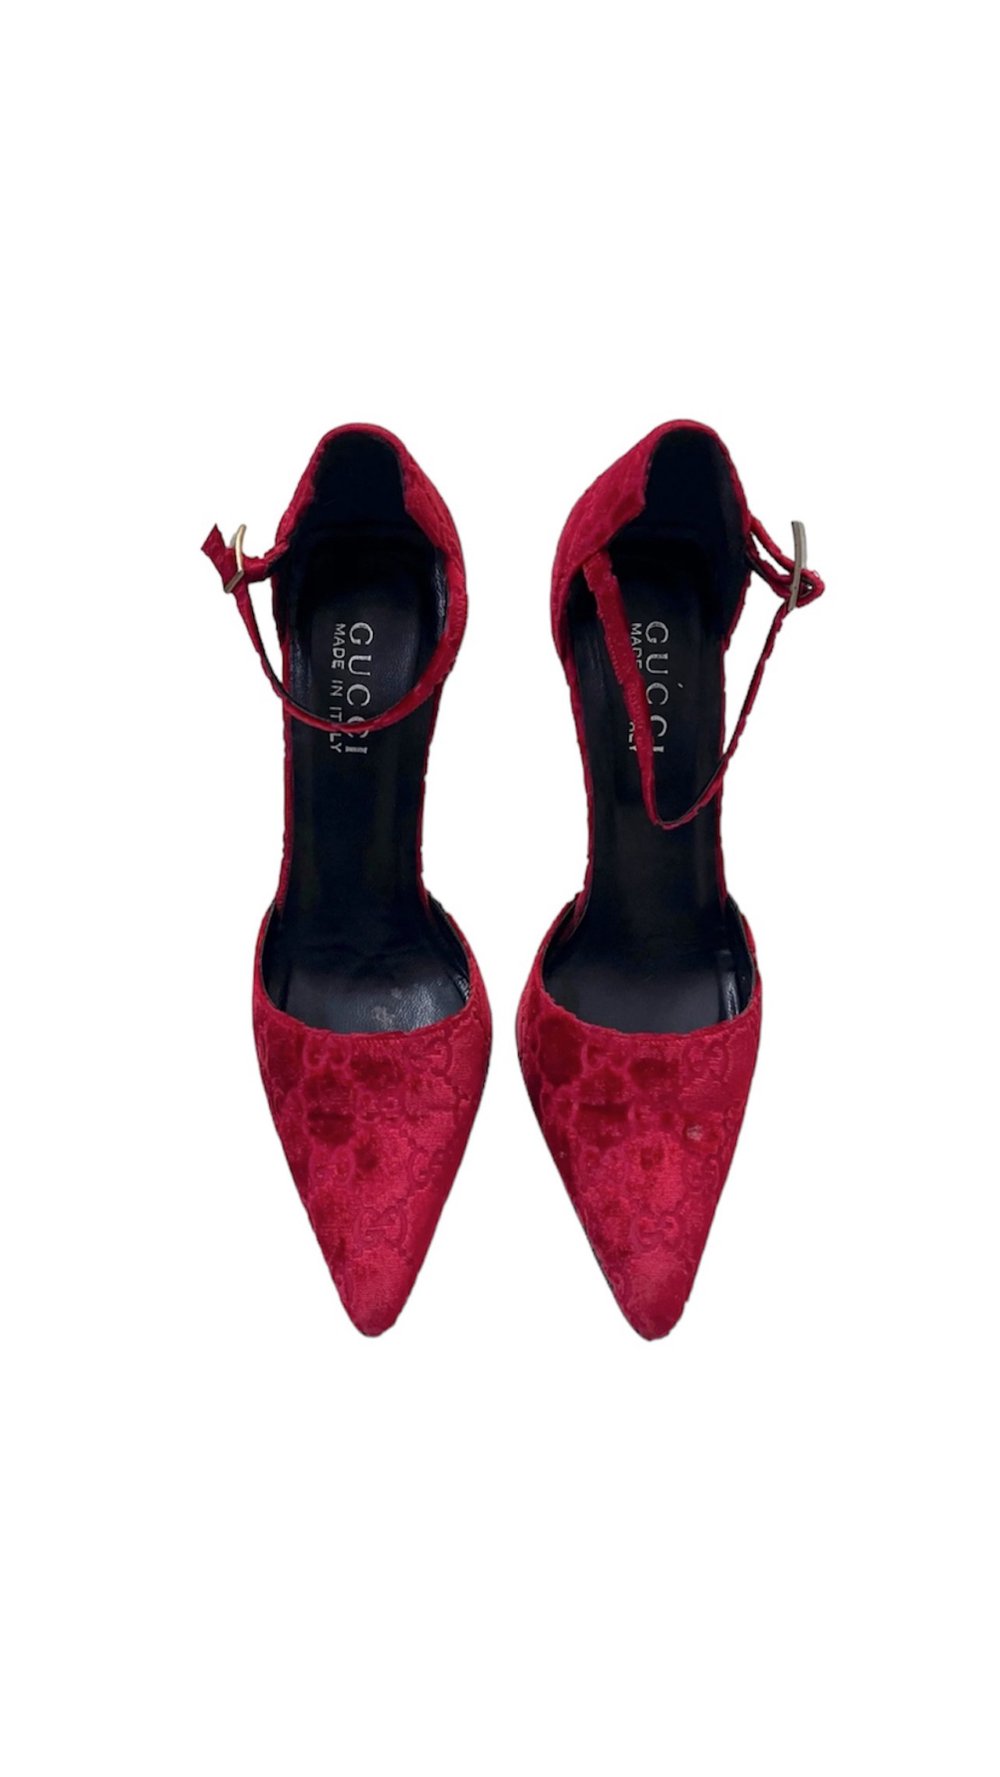 Image of GUCCI by TOM FORD VELVET PUMPS 